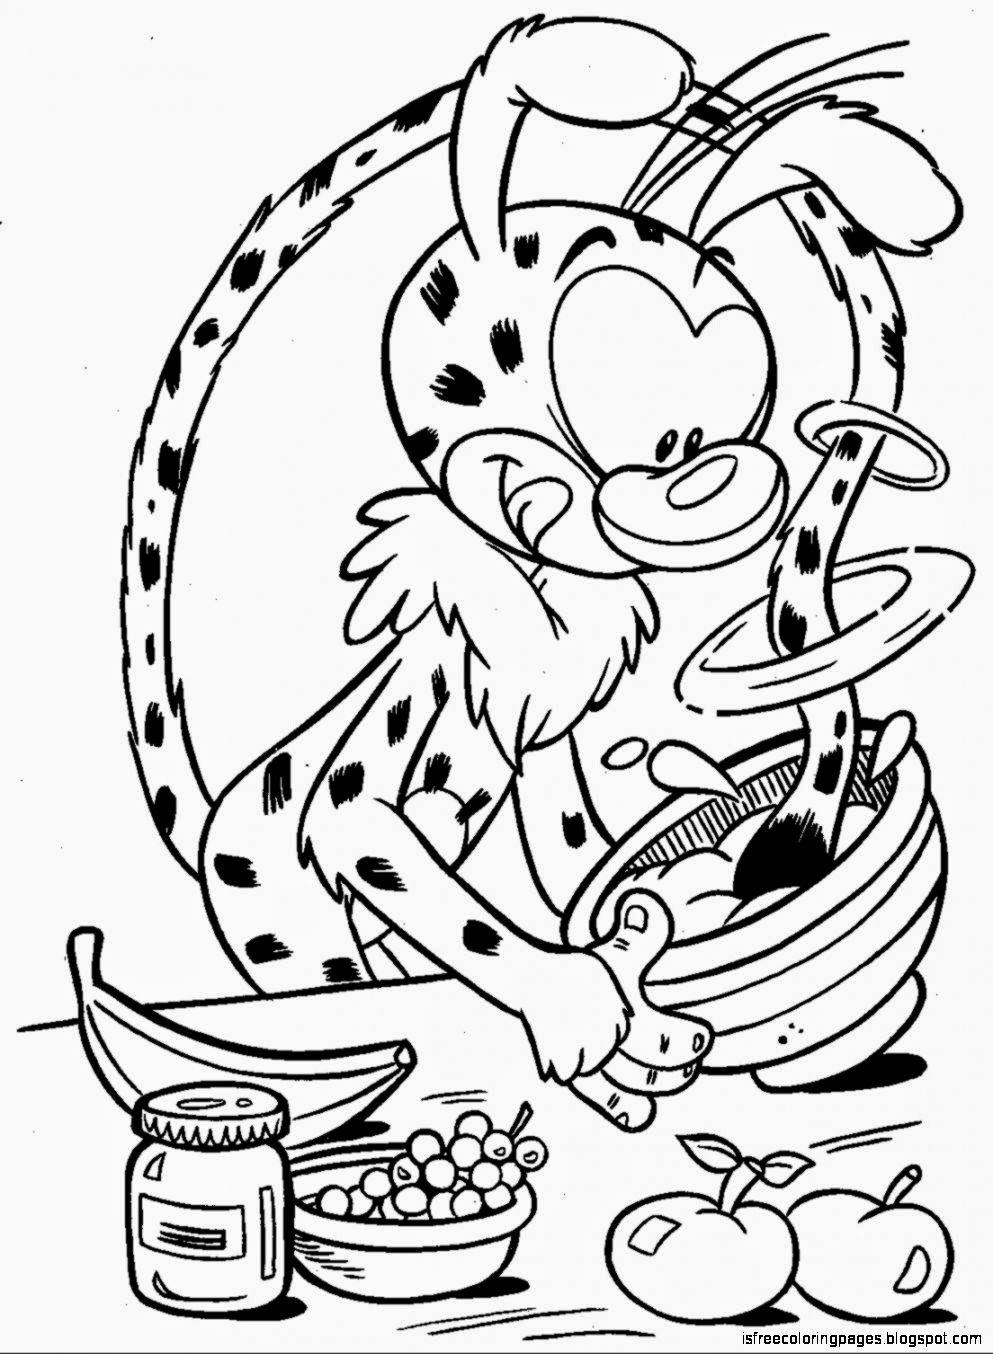 Marsupilami Coloring Pages | Free Coloring Pages pour Coloriage Marsupilami